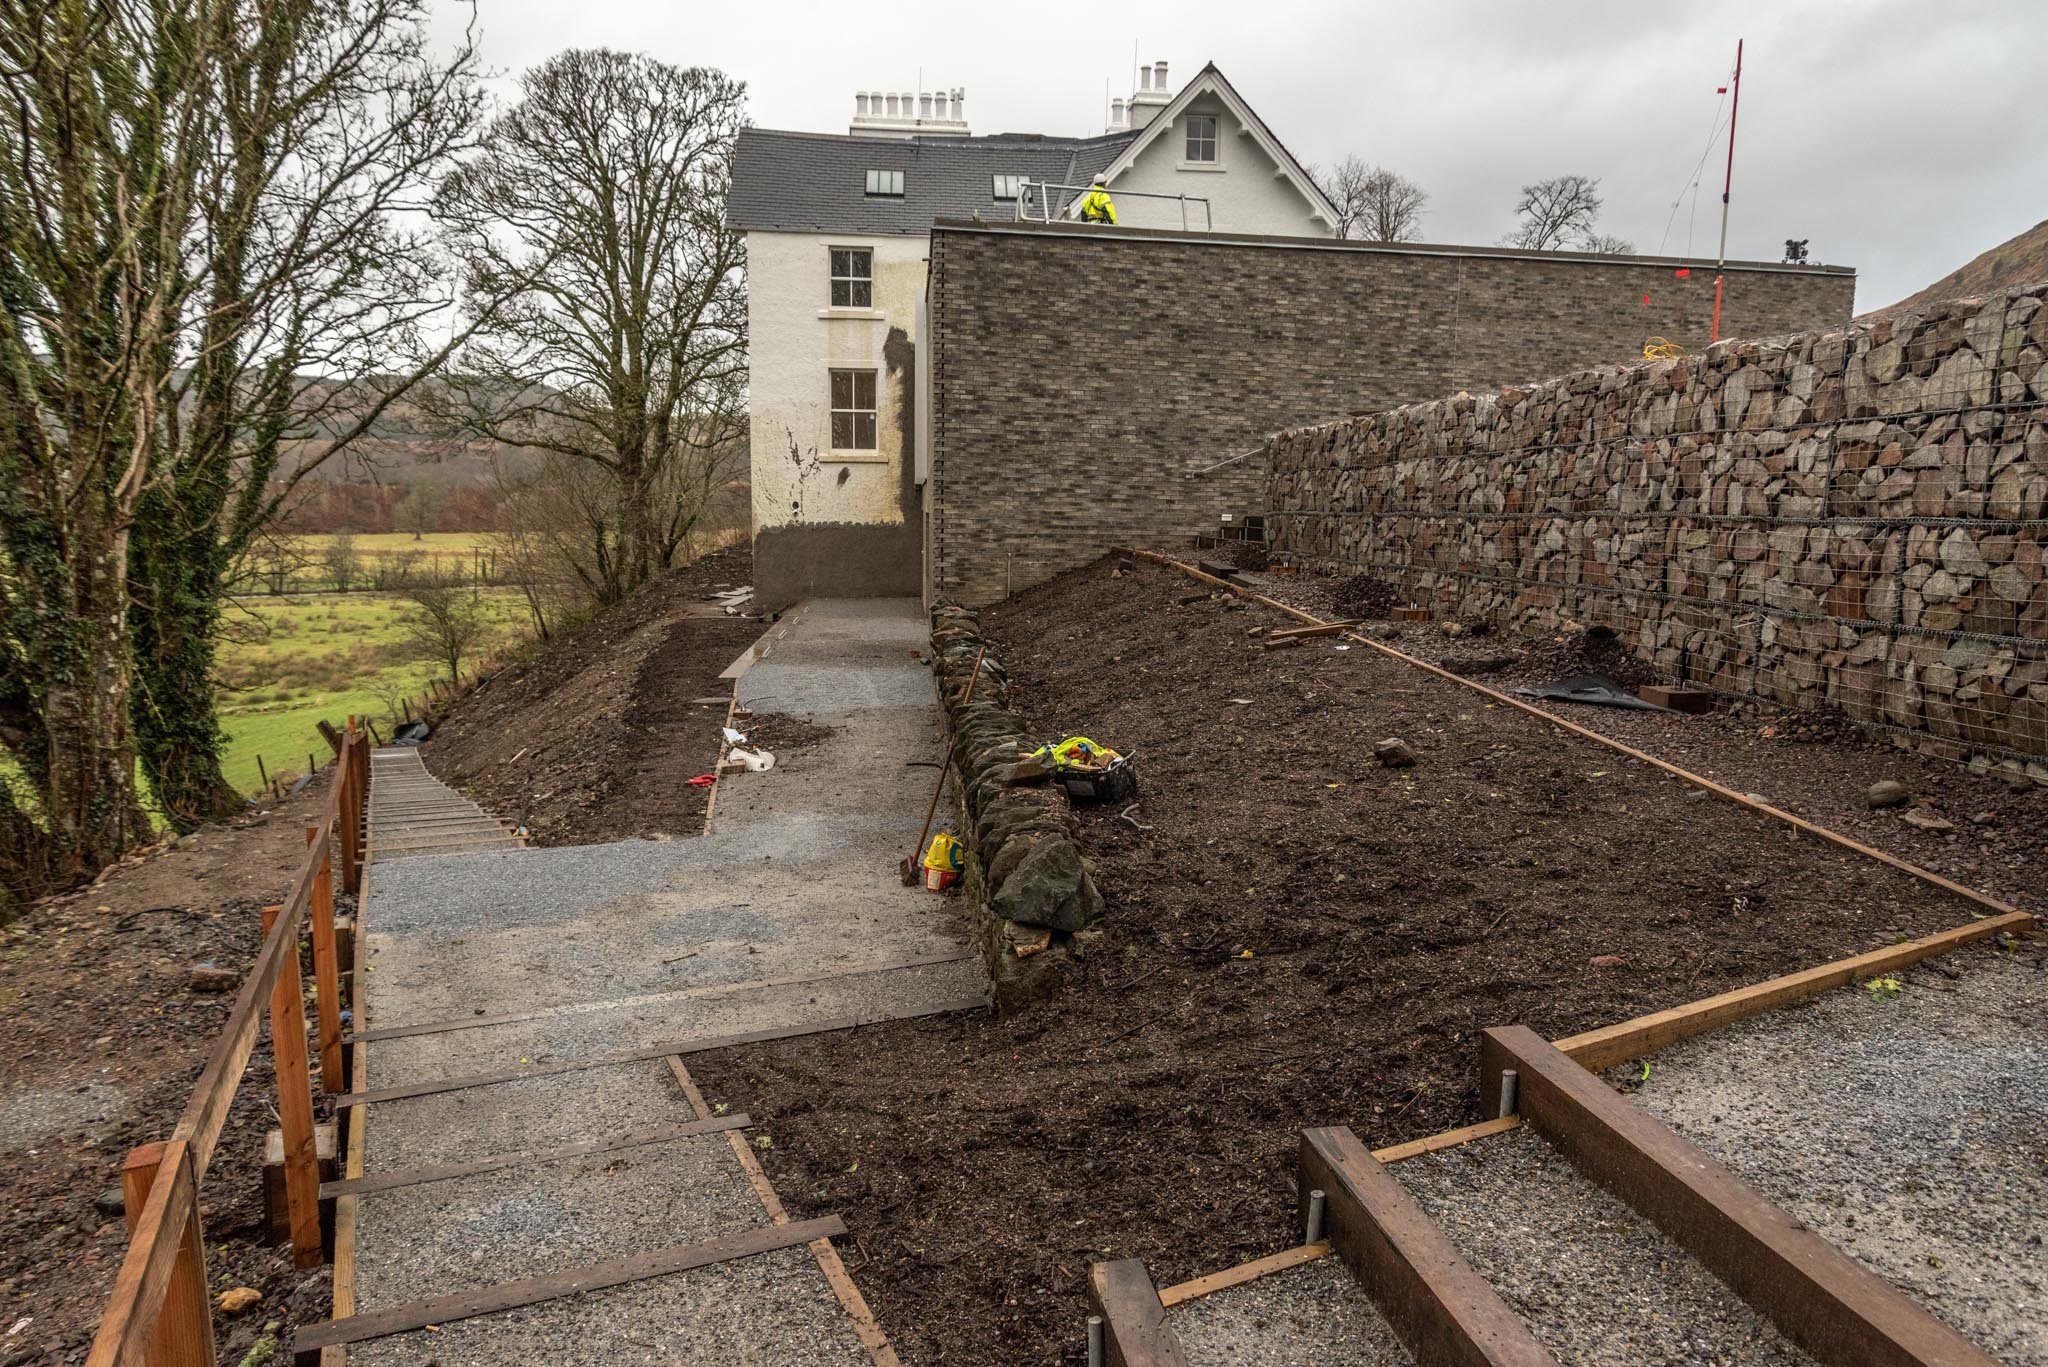  Pathways are being constructed around the redeveloped buildings, providing access to the Glebe field below. 